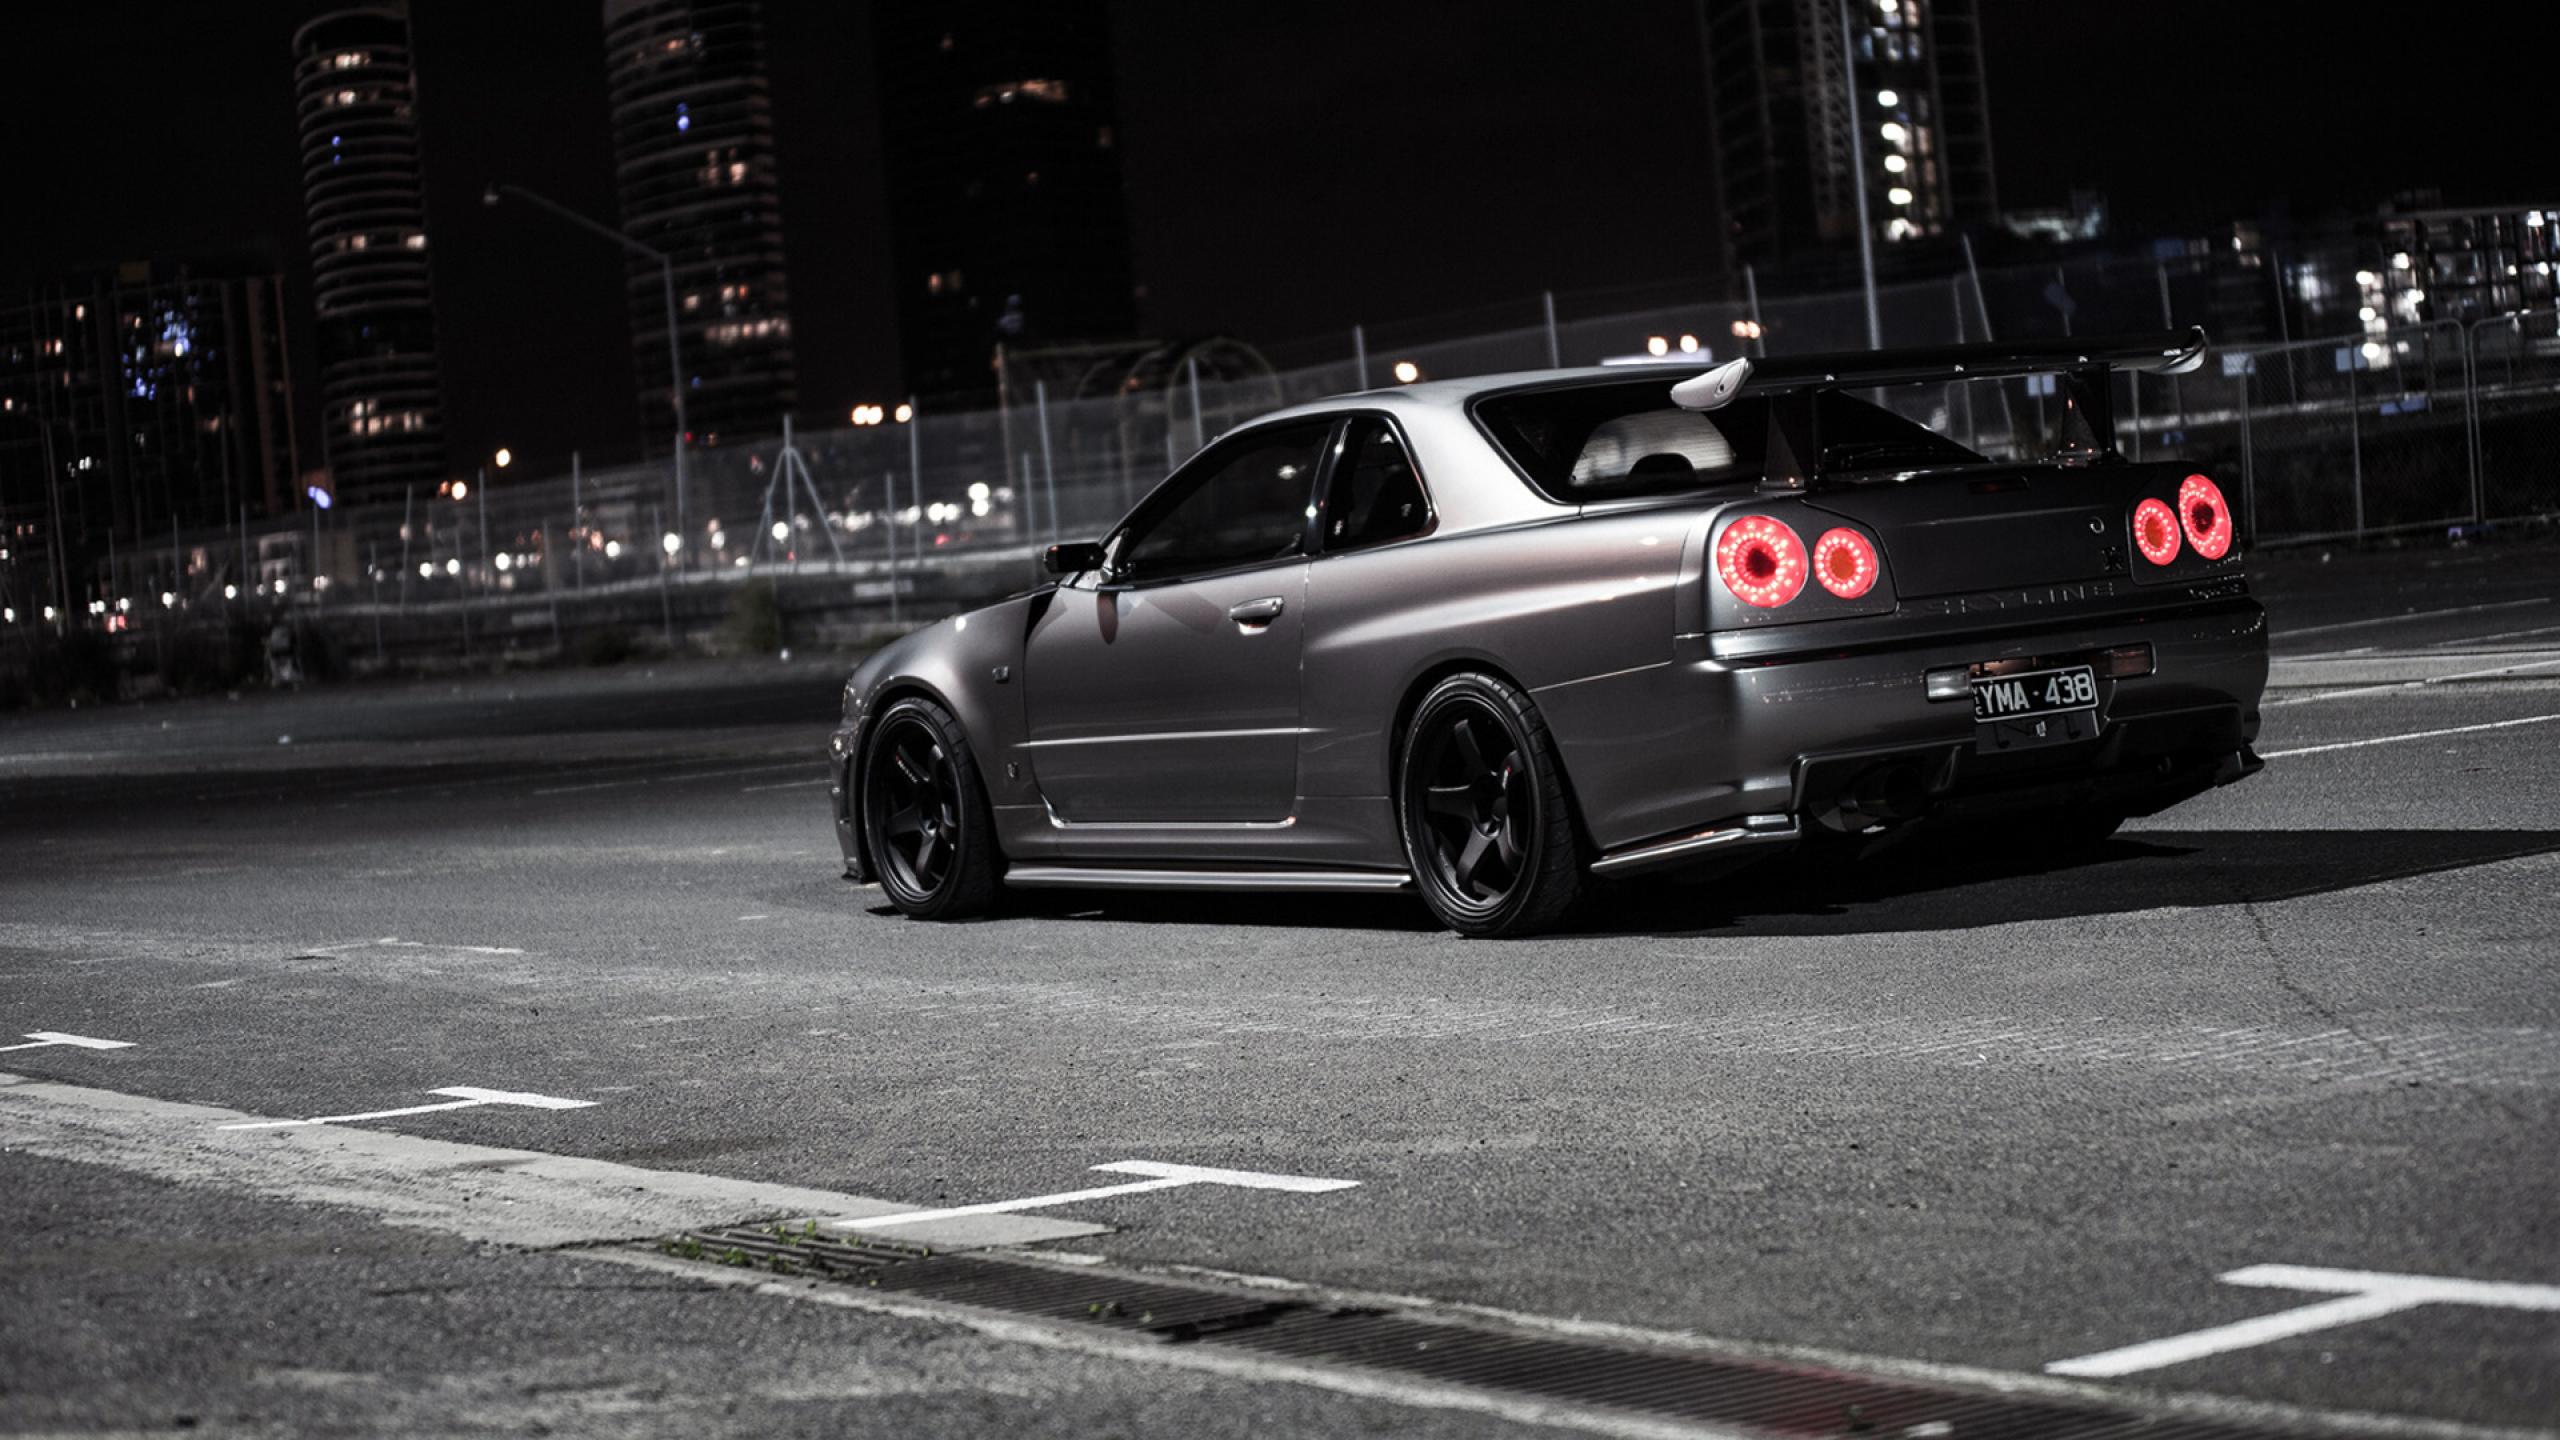 HQ Nissan Skyline GT R Wallpaper Full HD Pictures